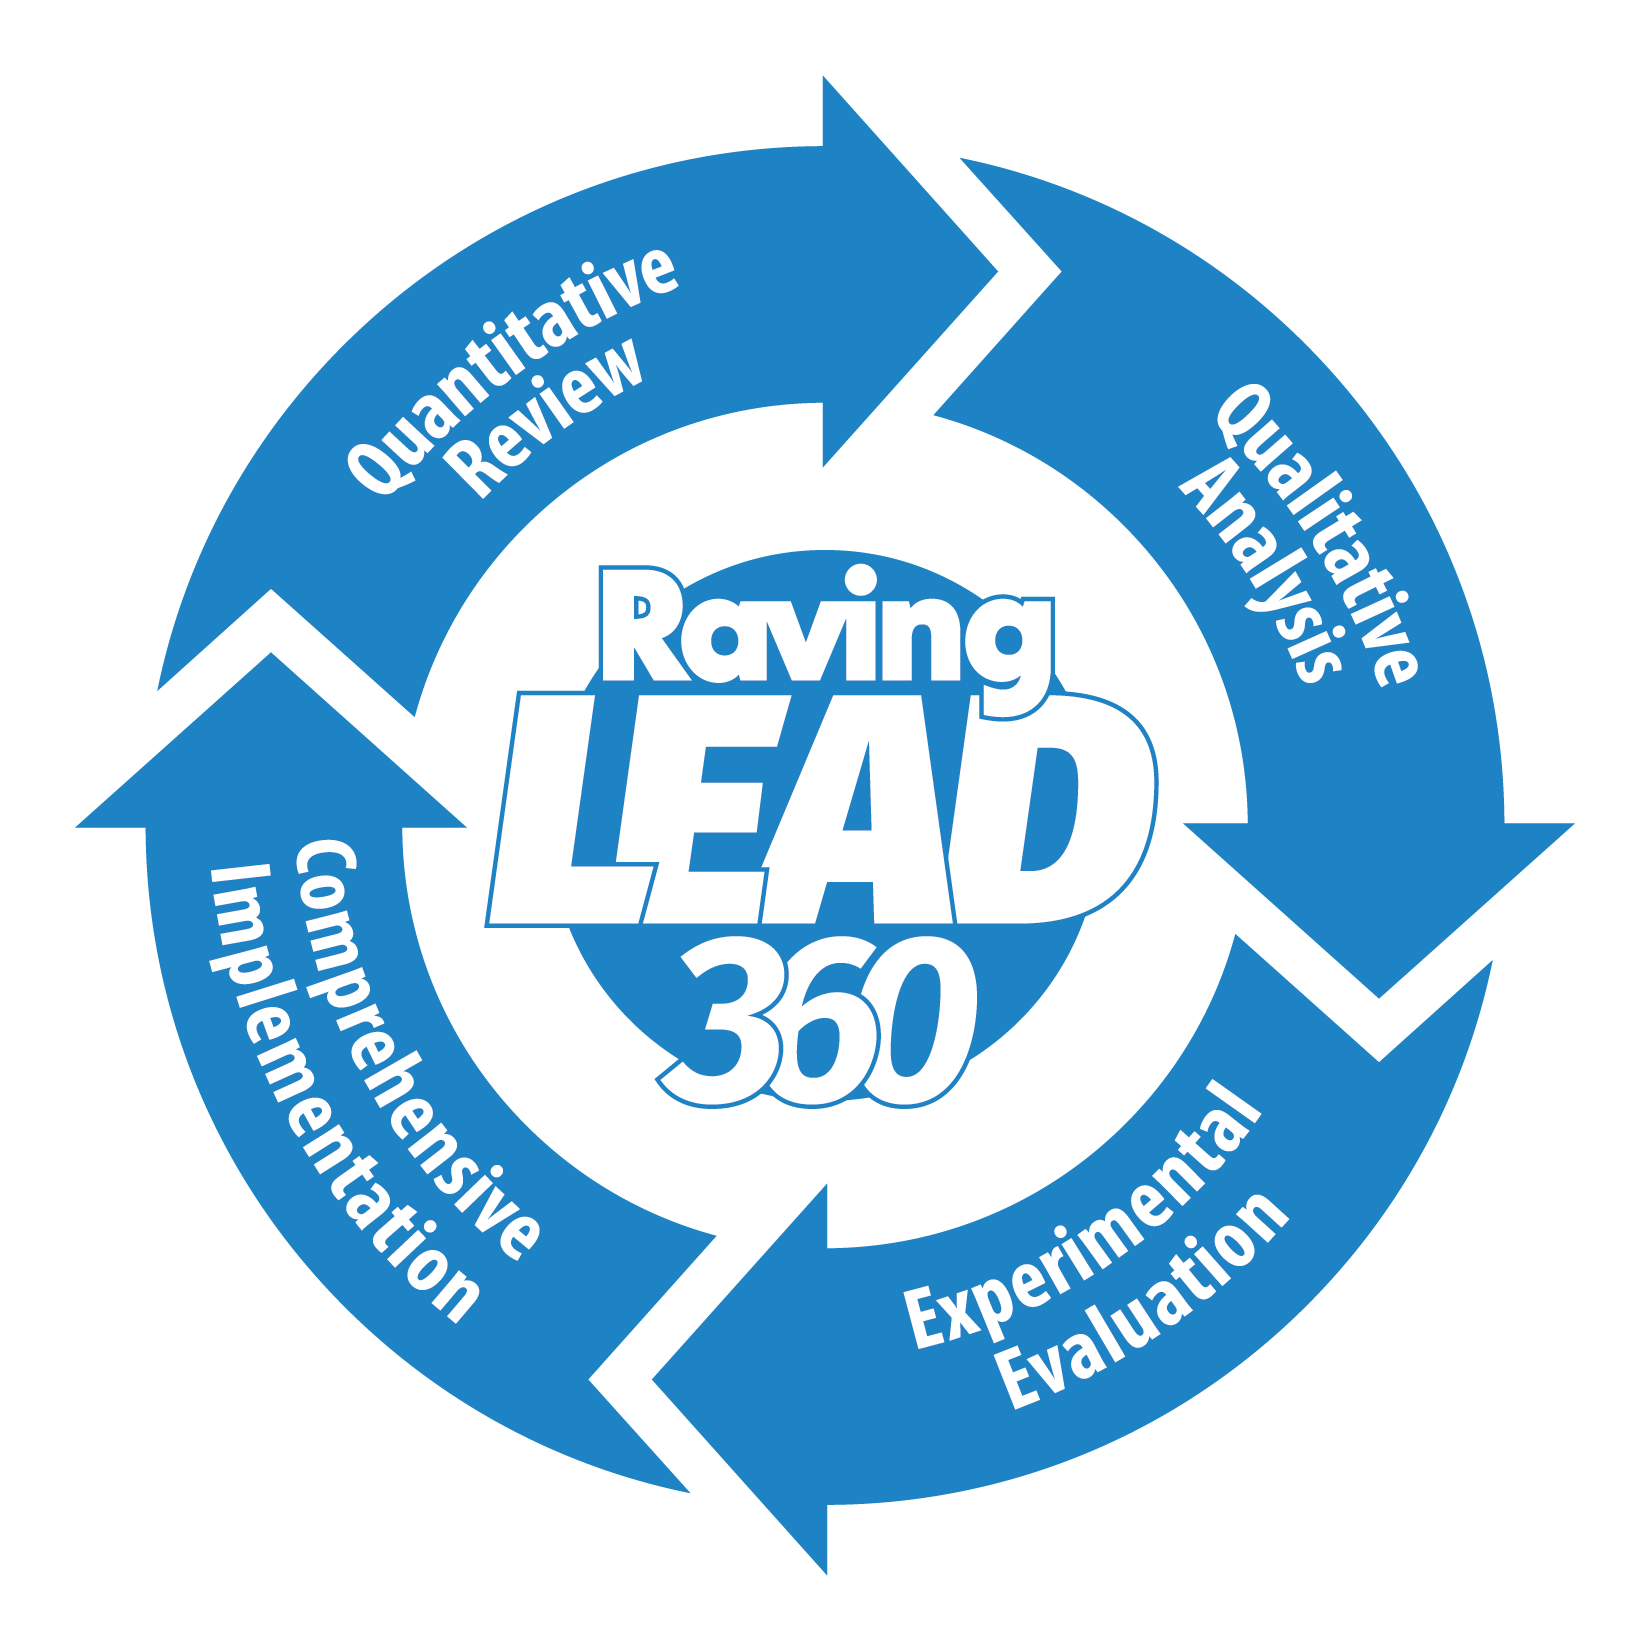 Raving_LEAD_360_graphic_master-01